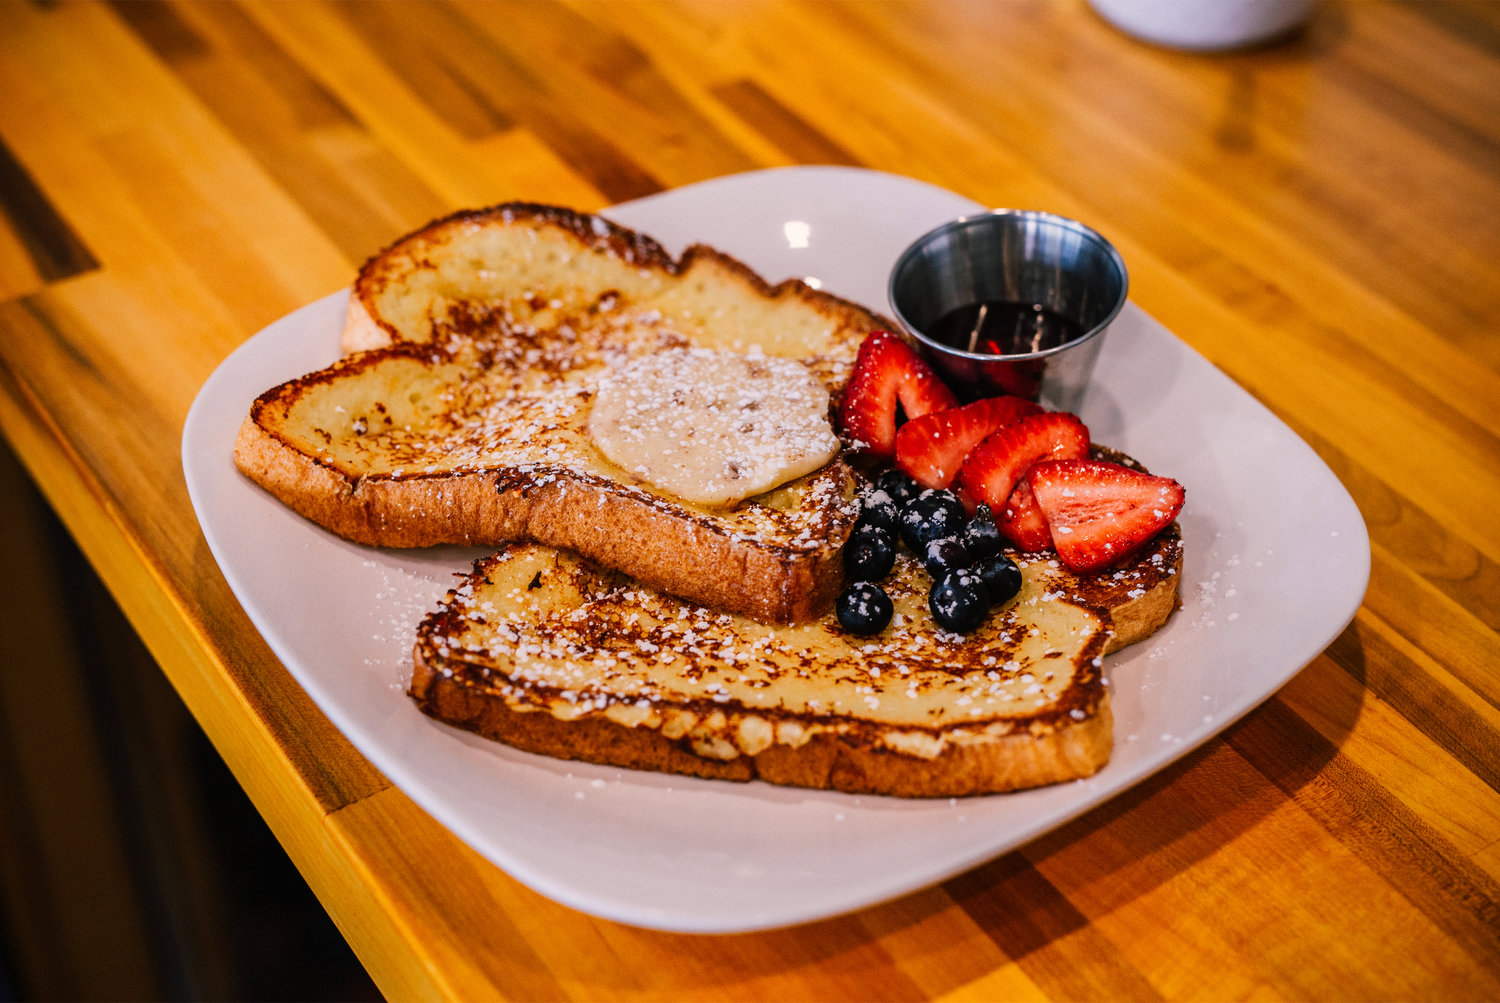 French toast and elevated brunch fare are staples at a Cranston cafe